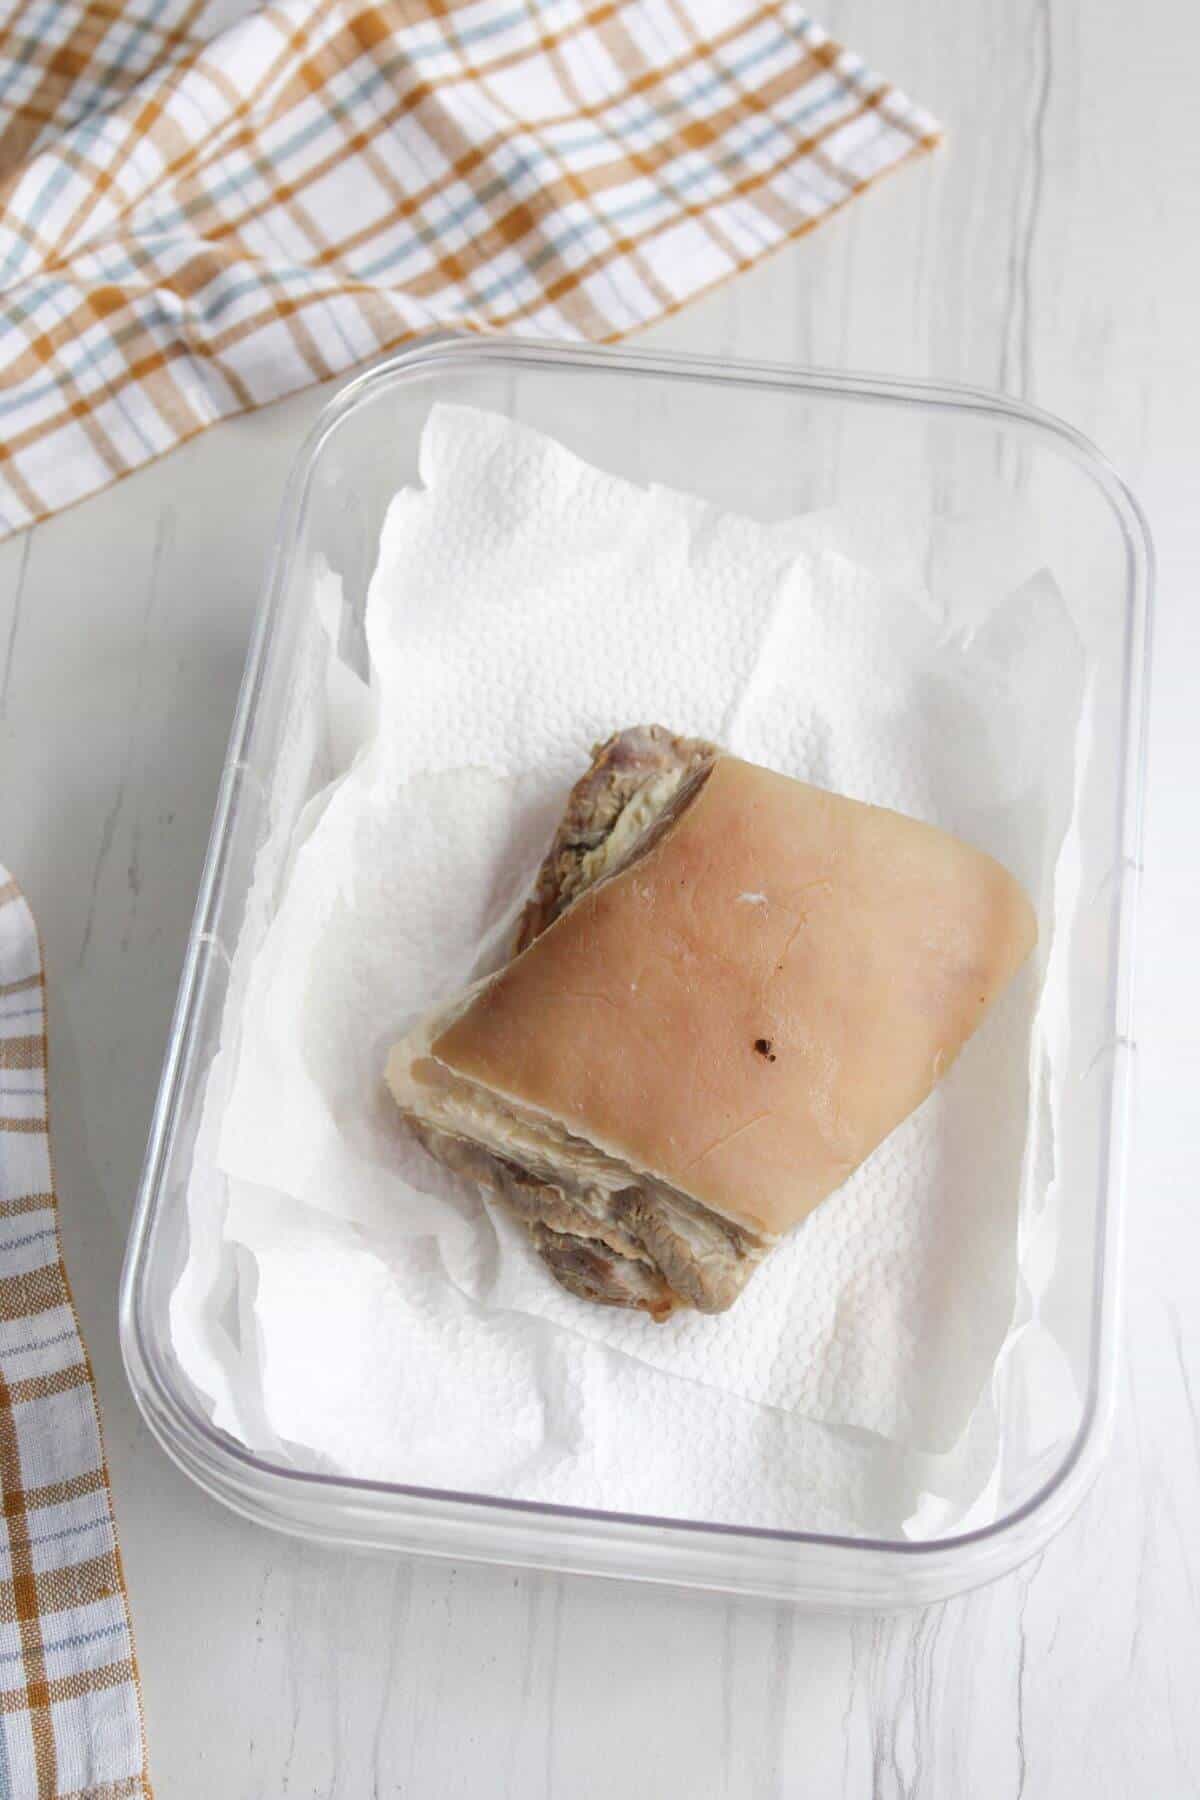 A piece of boiled pork belly in a container on top of a paper towl.